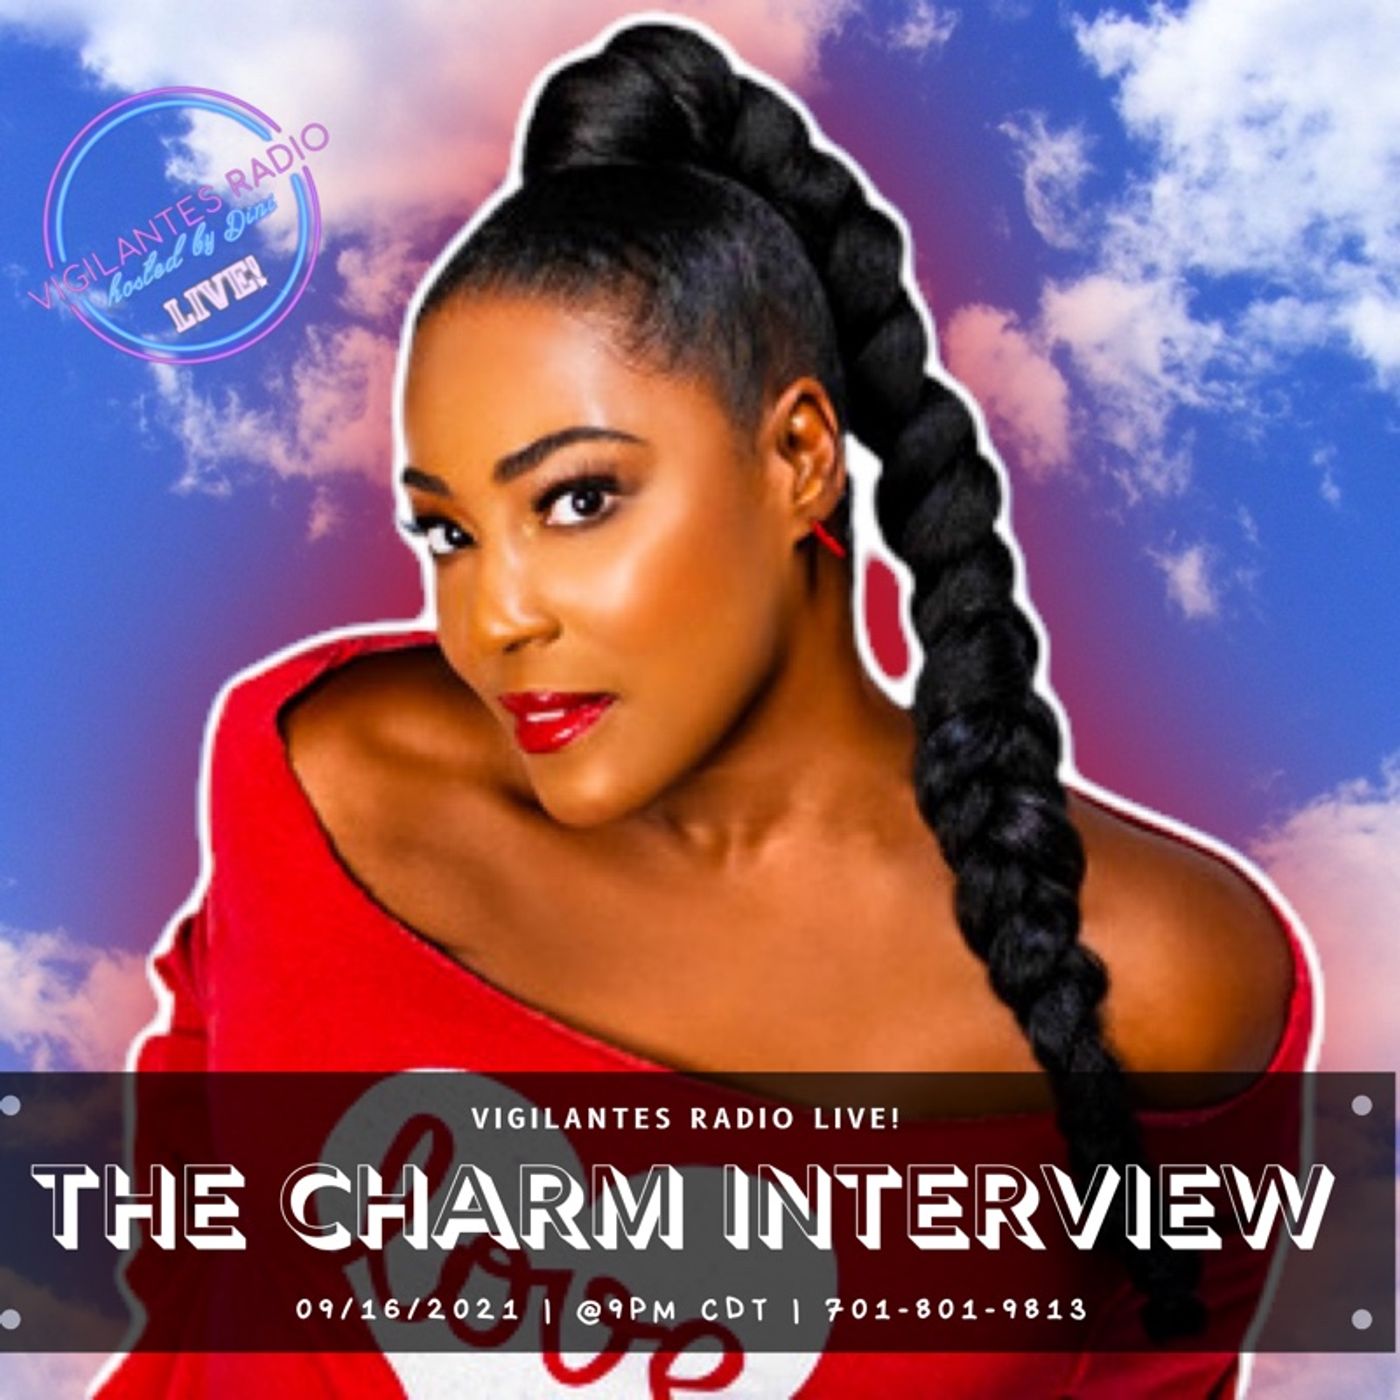 The Charm Interview. Image